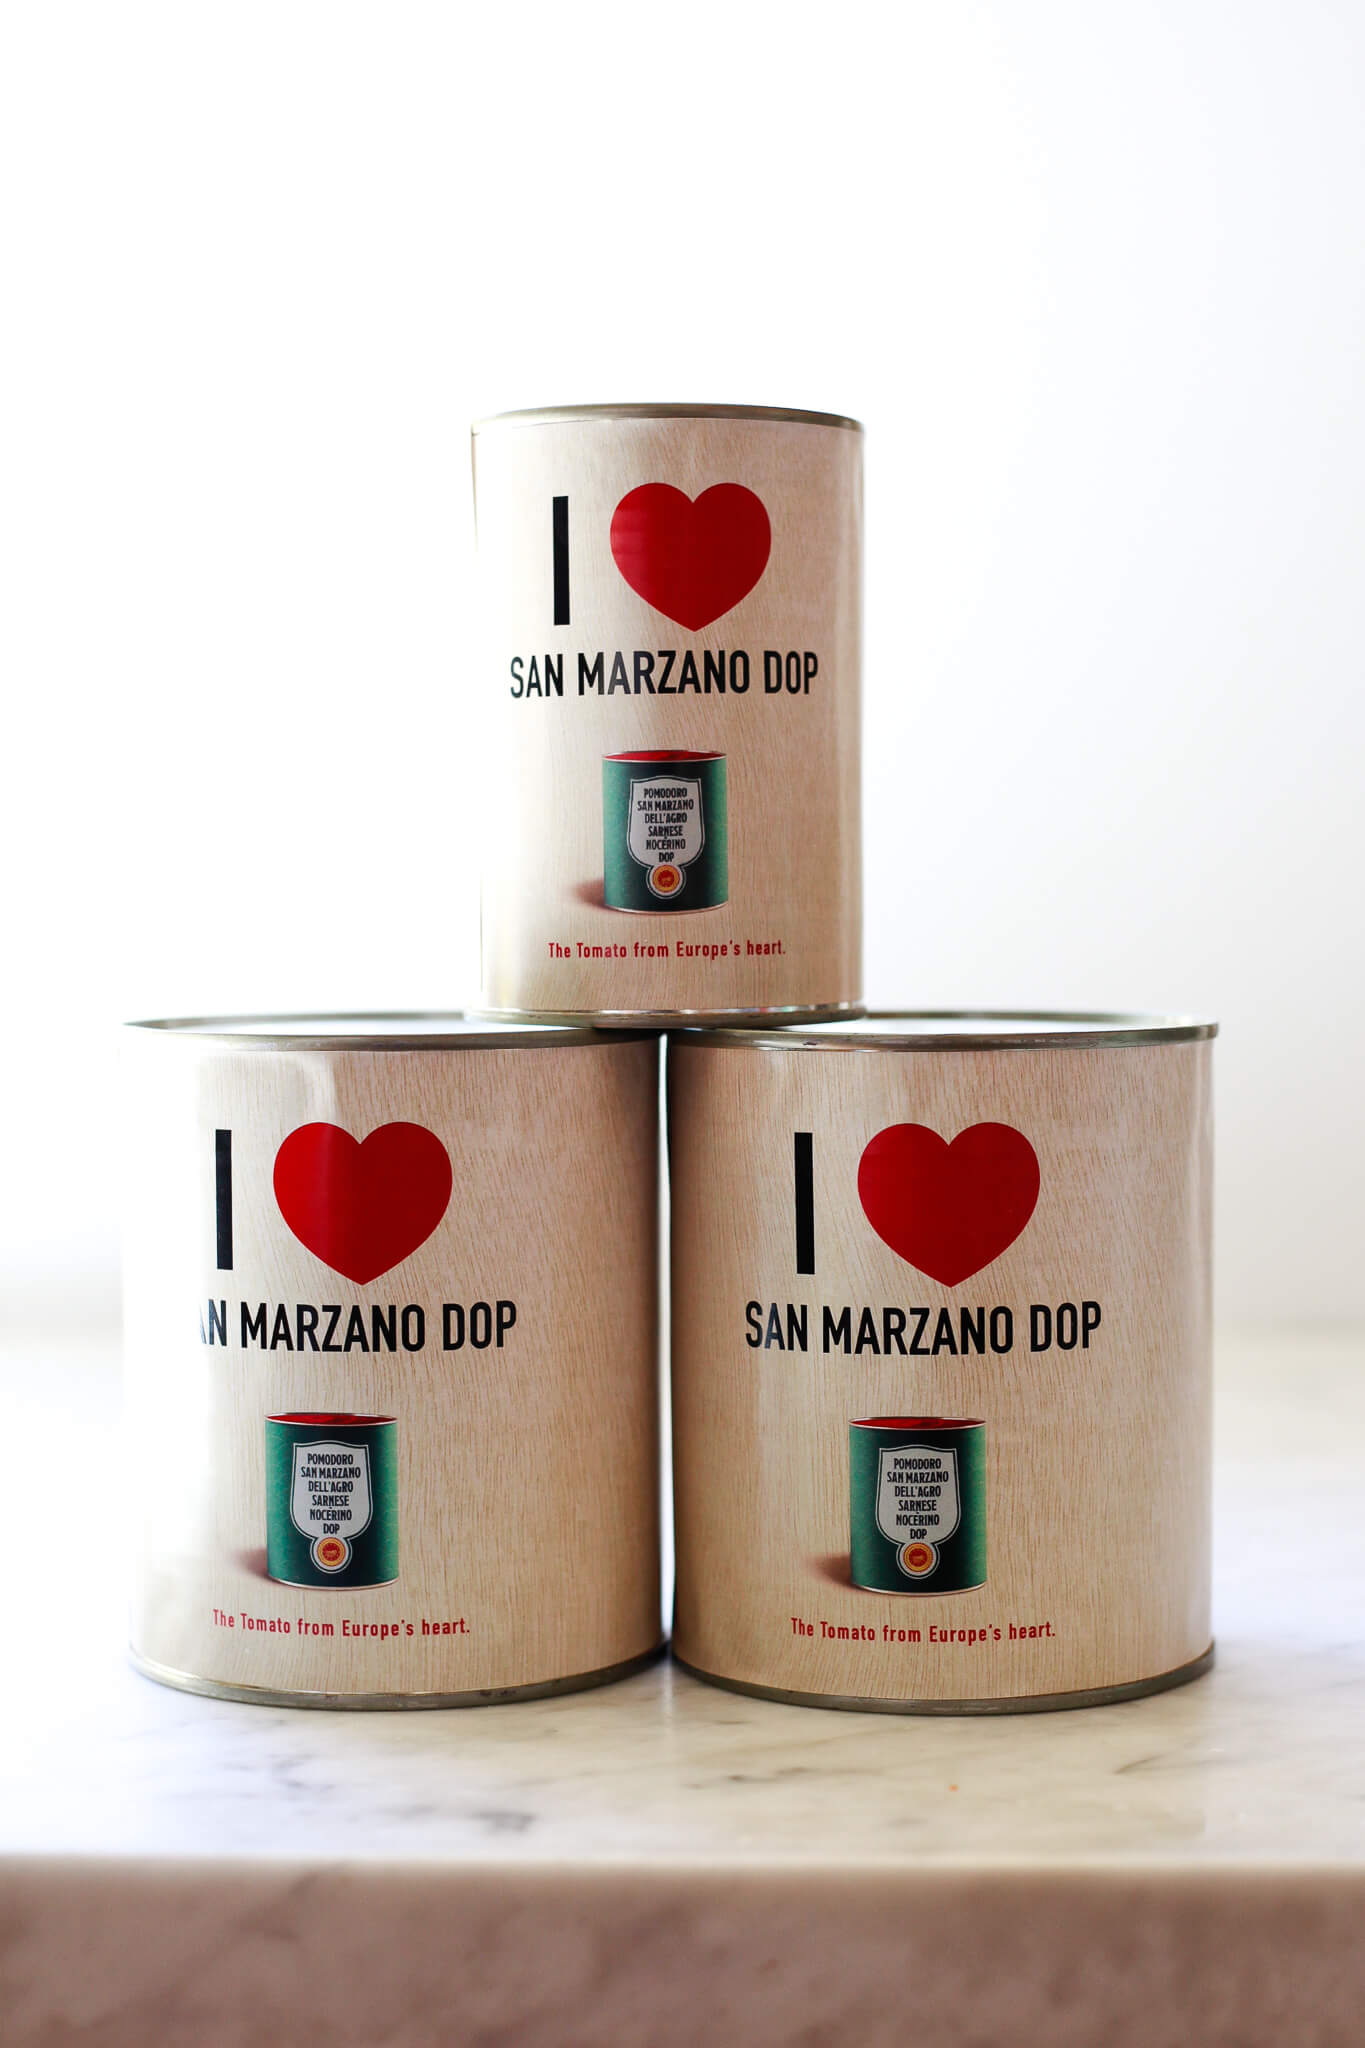 Three cans with I heart San Marzano DOP labels sit on a white marble countertop. 